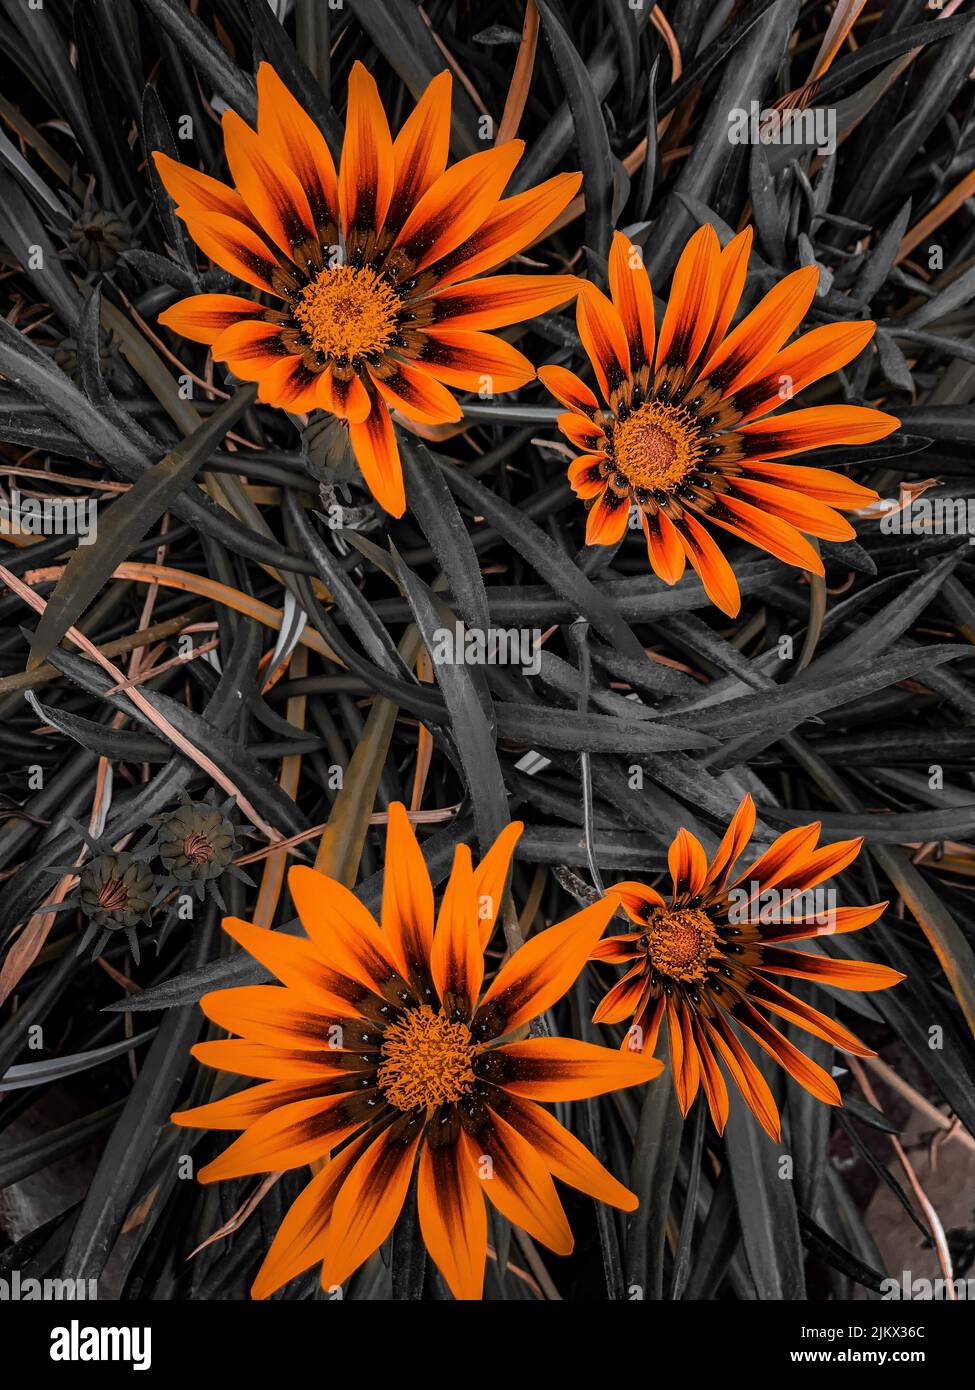 A blooming orange Gazania flowers on background of leaves Stock Photo